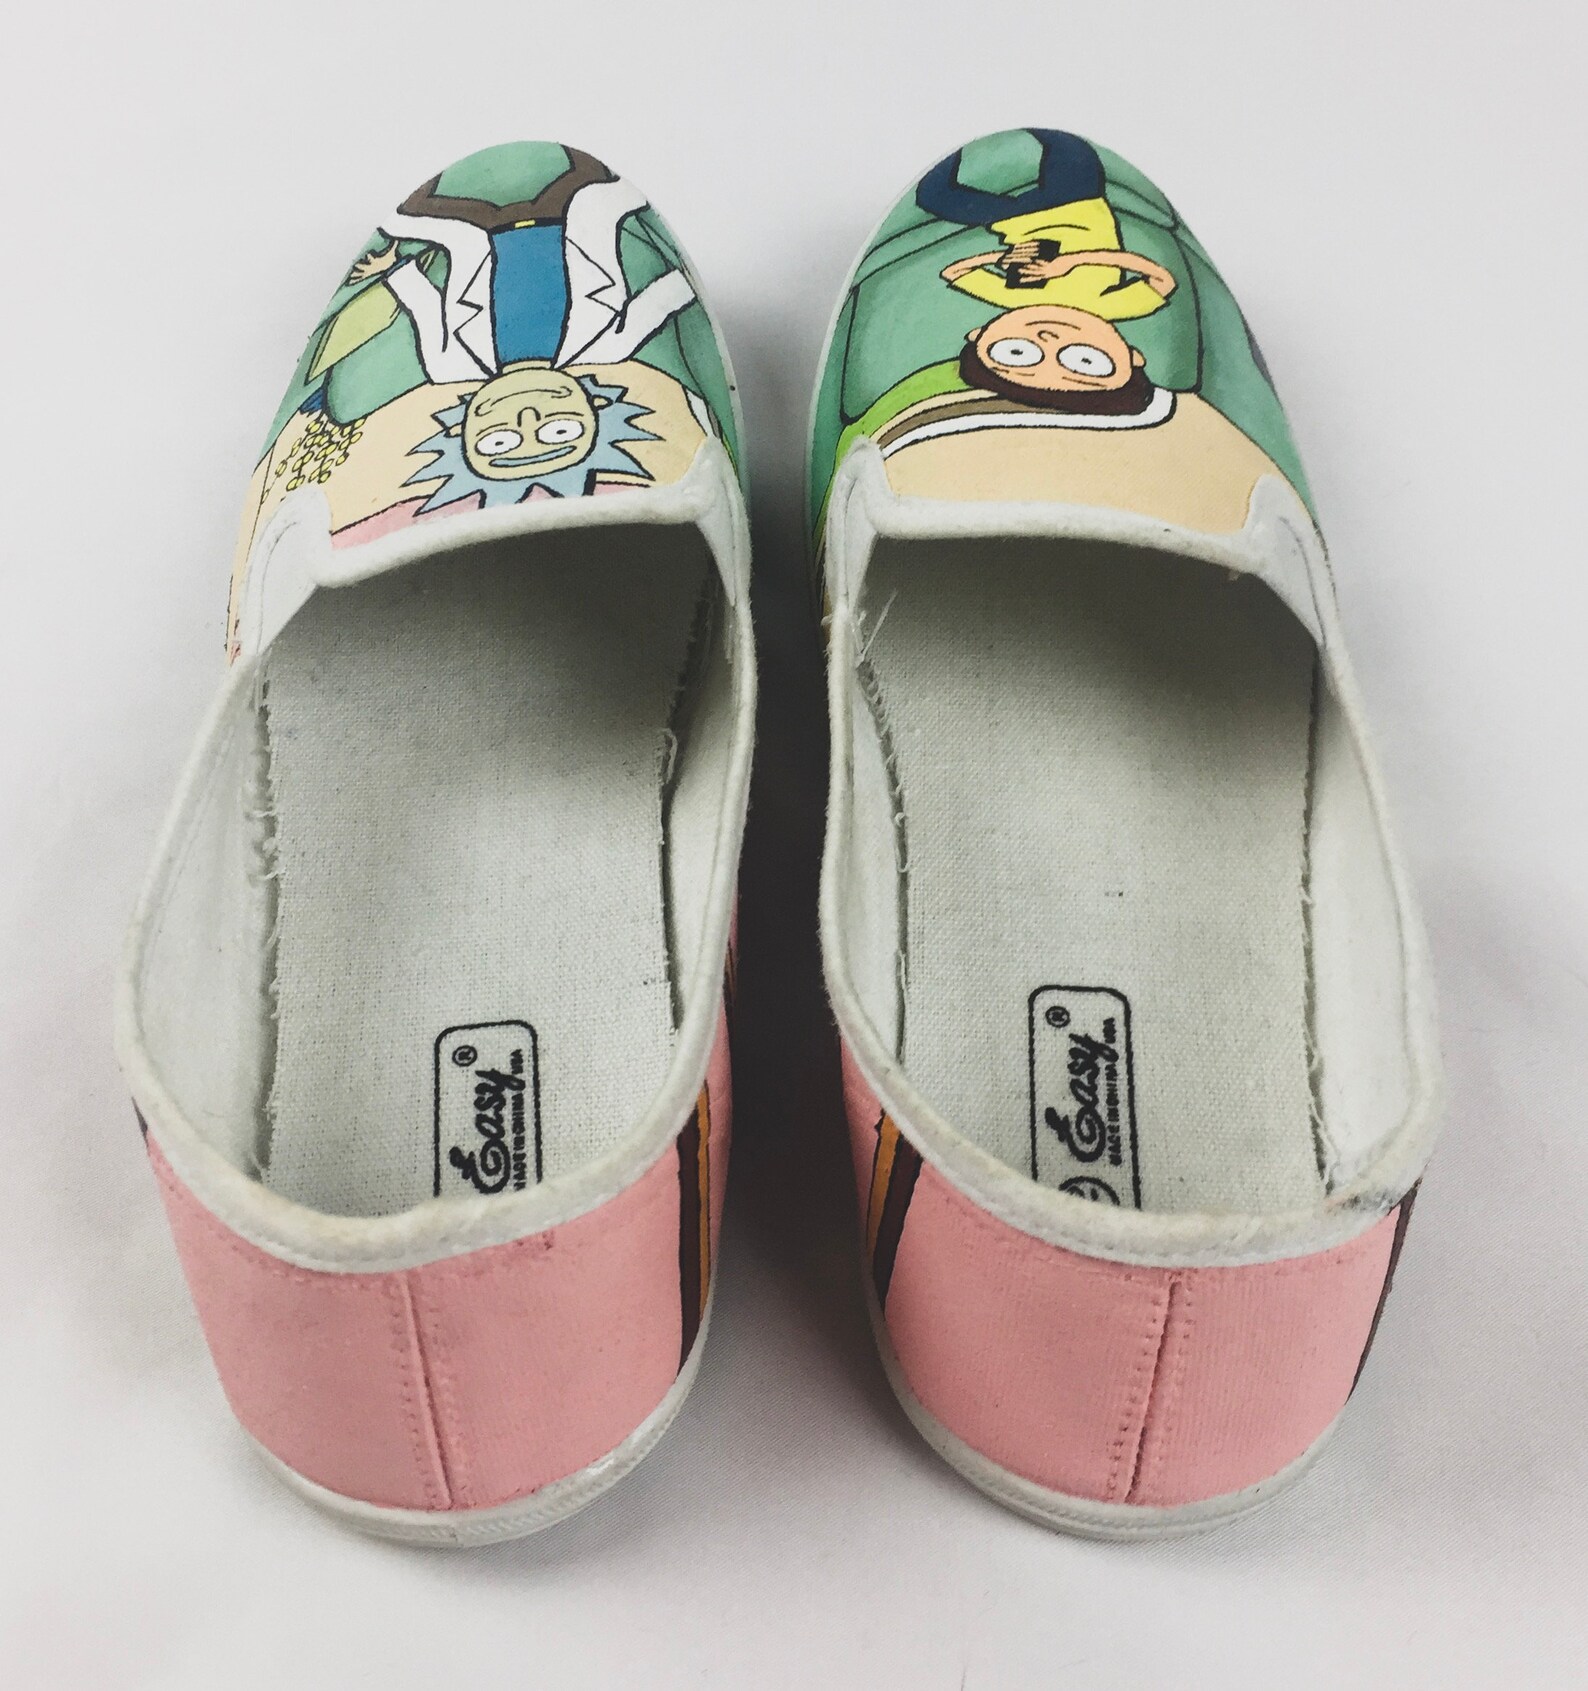 Custom Painted Shoes with Cartoon Image | Etsy